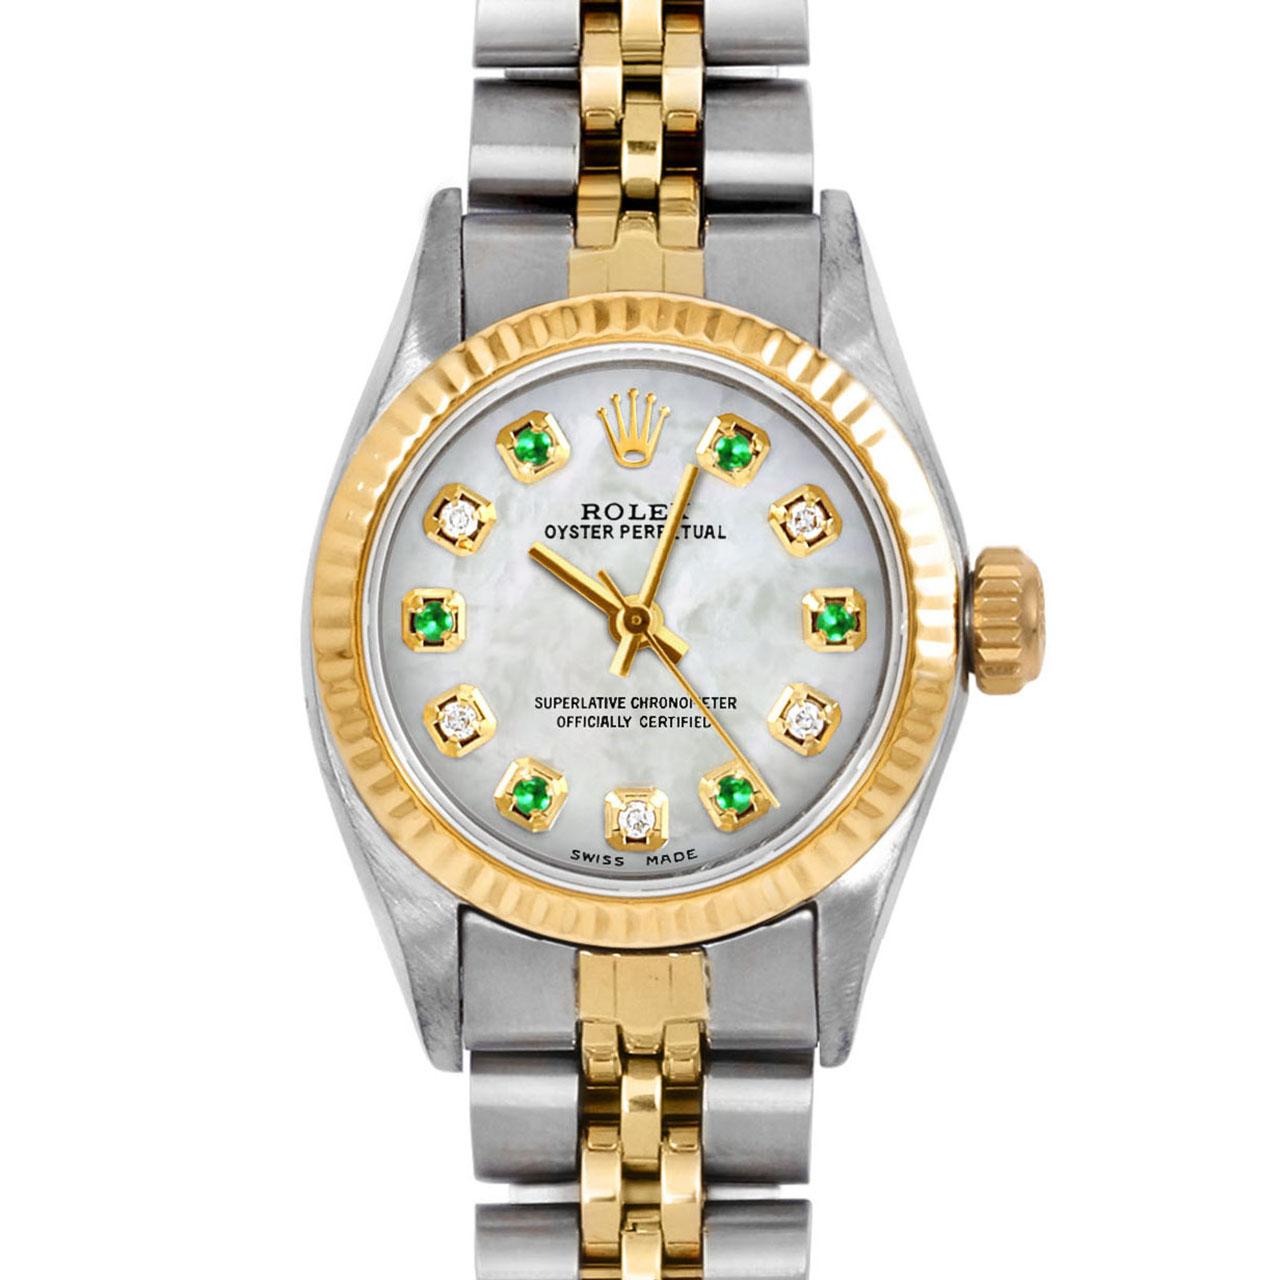 Brand : Rolex
Model : Oyster Perpetual 
Gender : Ladies
Metals : 14K Yellow Gold / Stainless Steel
Case Size : 24 mm
Dial : Custom Mother Of Pearl Rainbow Emerald Diamond Dial (This dial is not original Rolex And has been added aftermarket yet is a